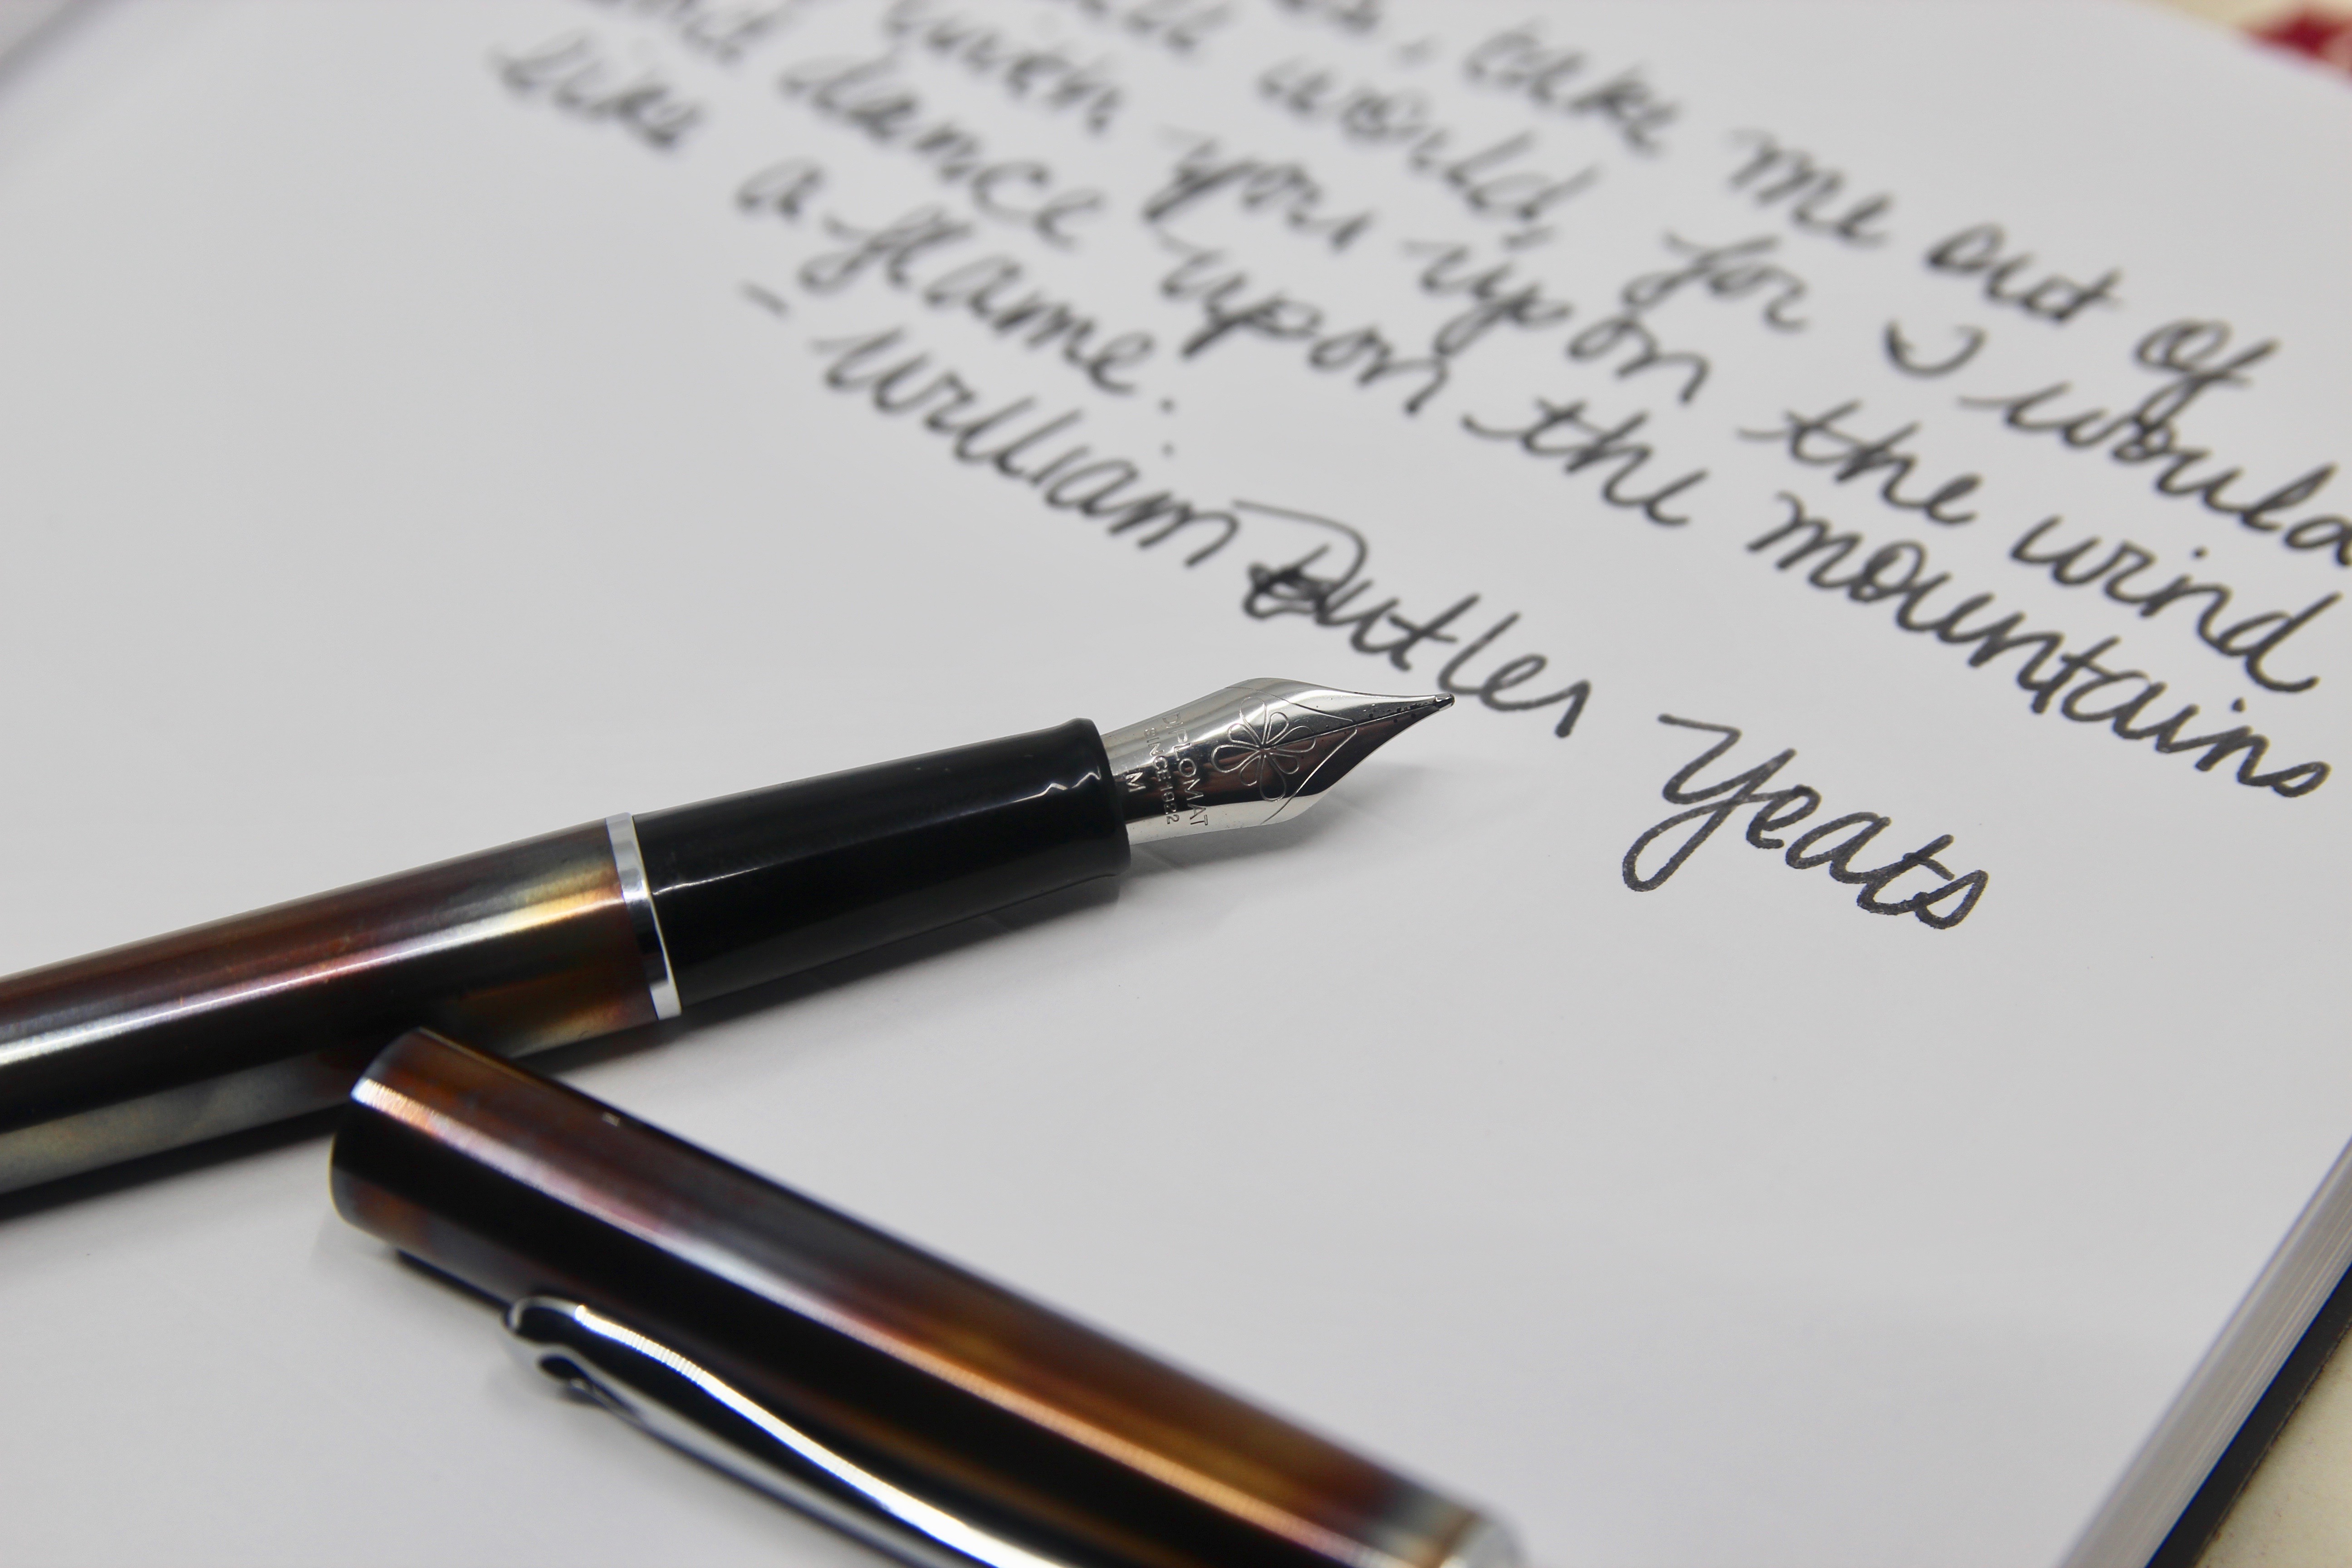 Pen Review: Traveller Medium - The Well-Appointed Desk